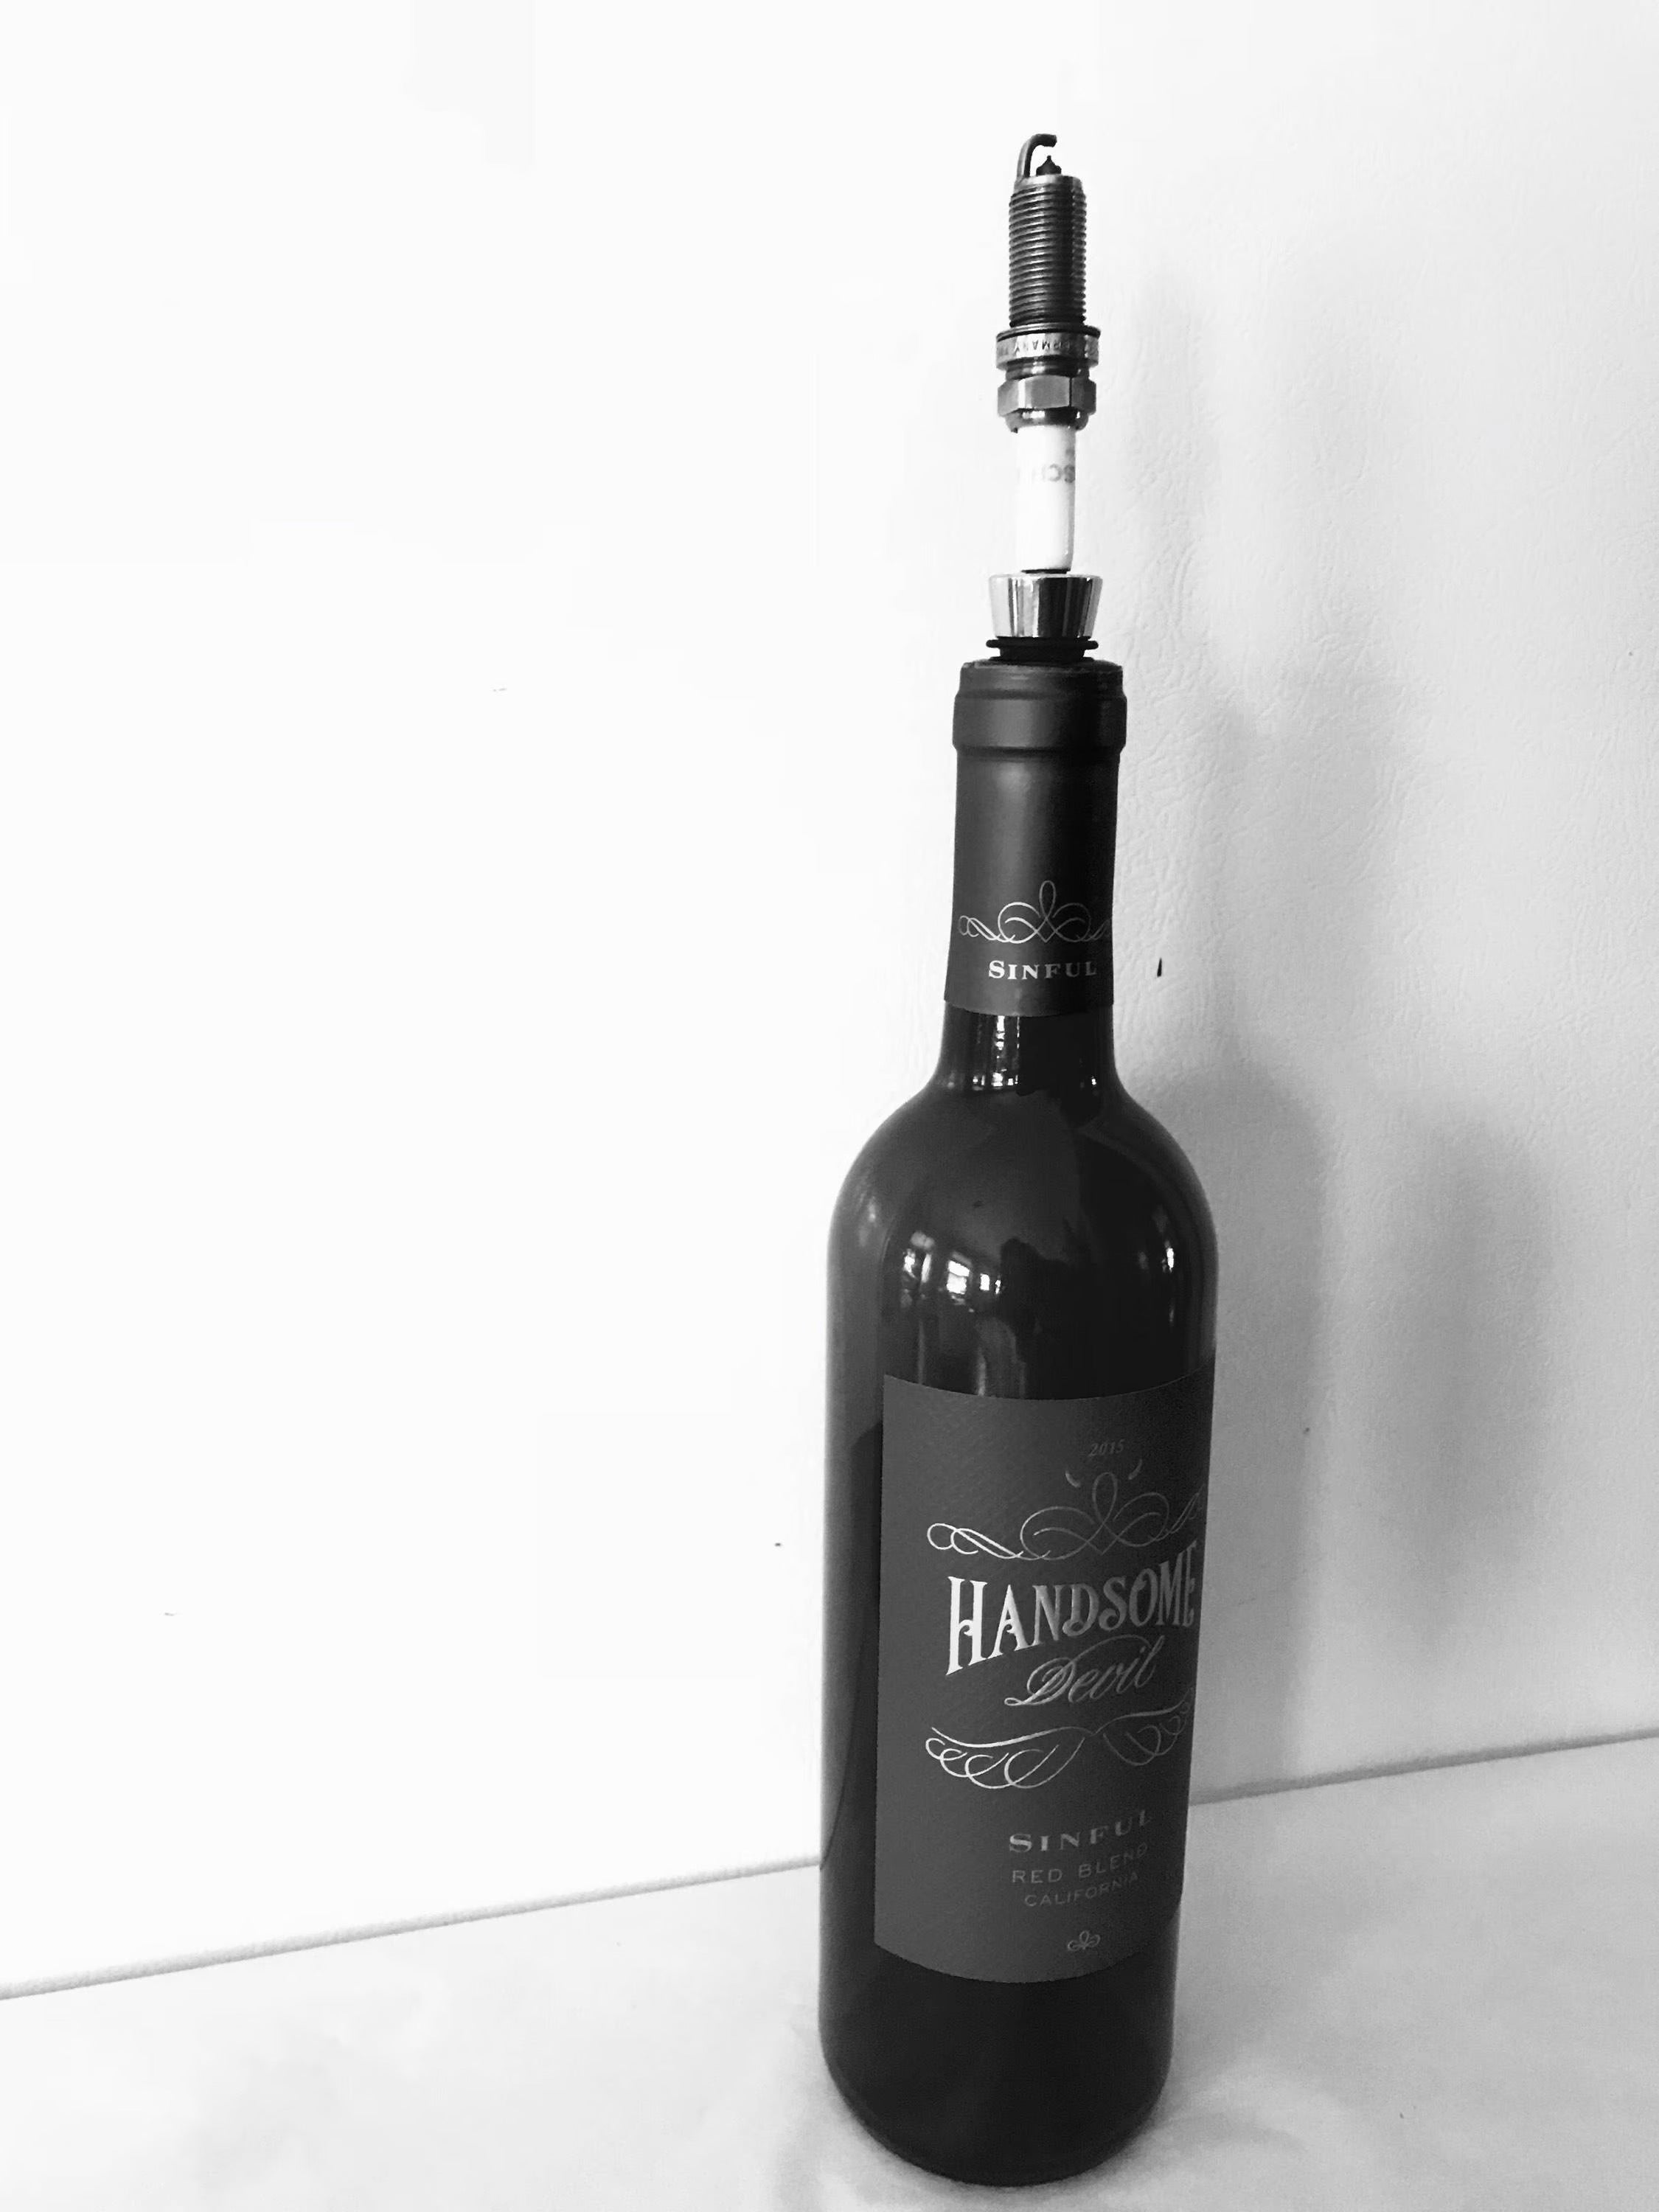 A bottle stopper made from a car's spark plug in use inside of a wine bottle.